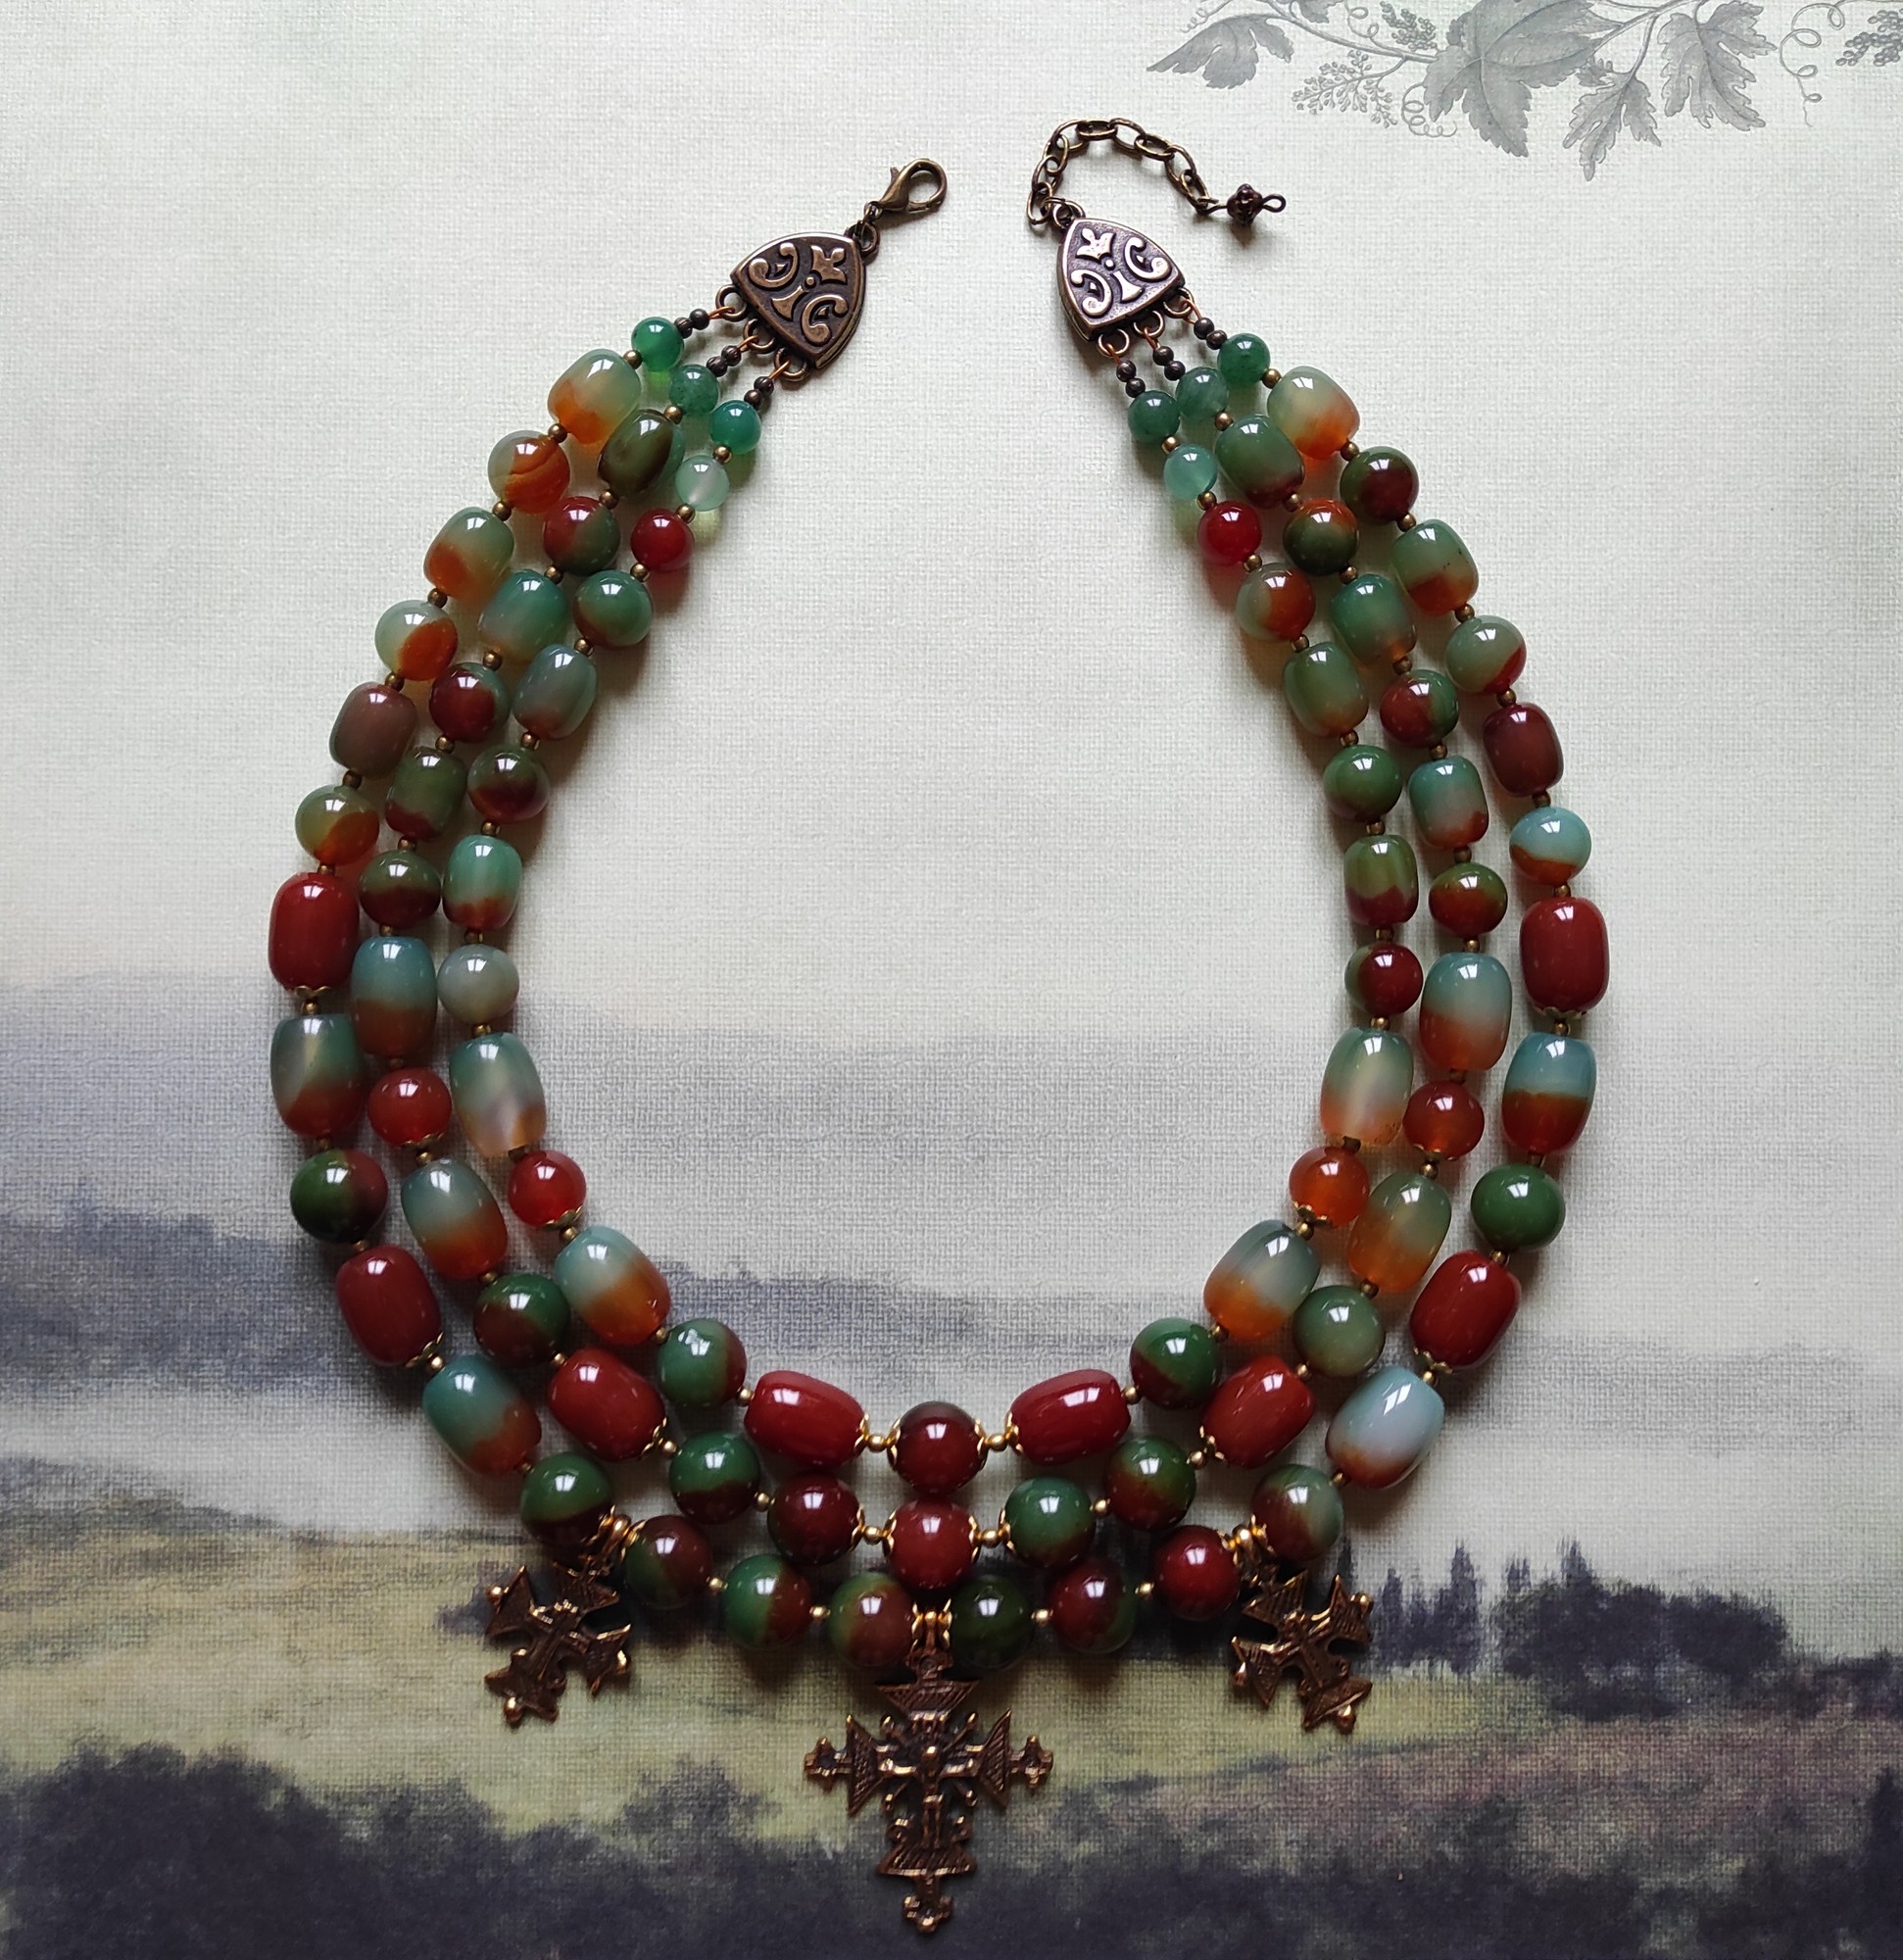 Necklace zgarda "Grapes" from agate "Peacock" and carnelian